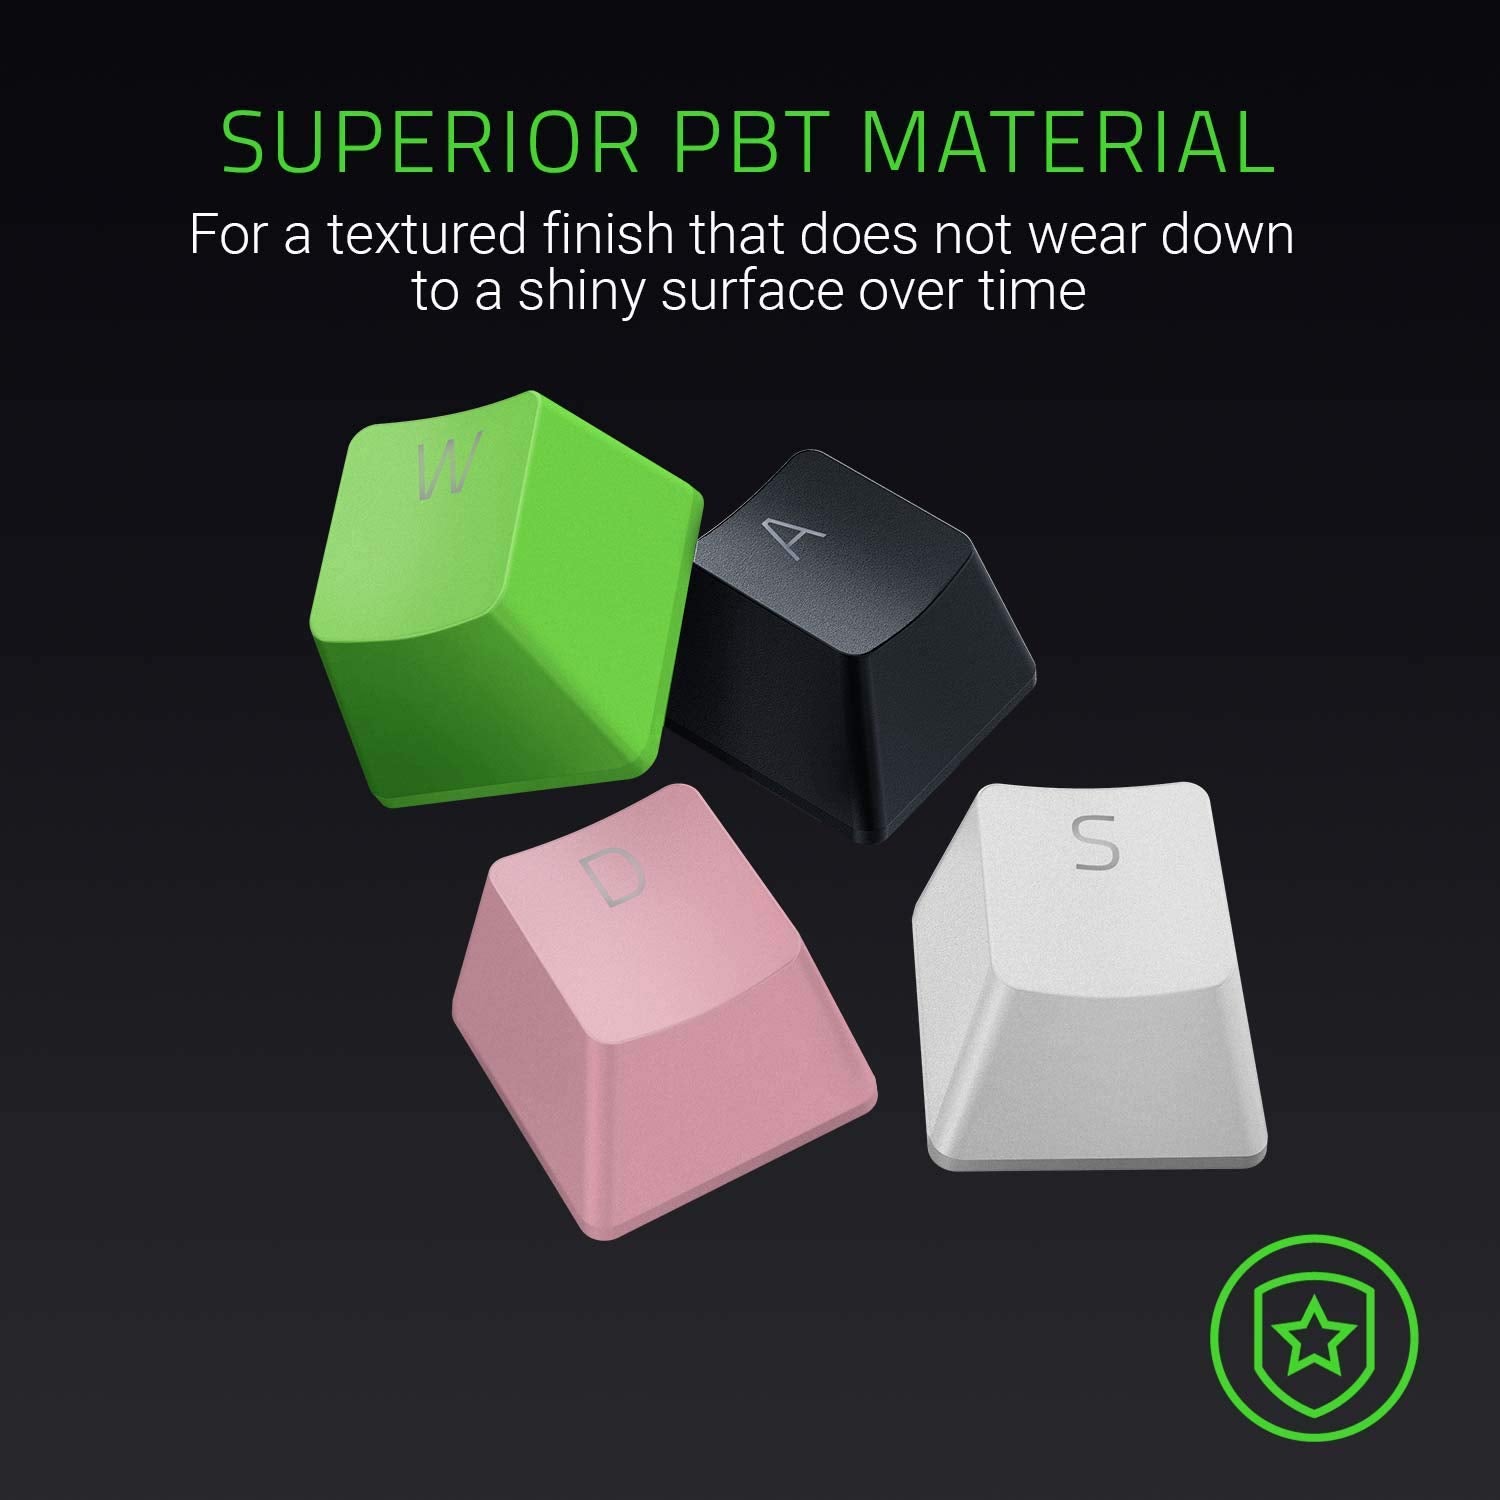 Razer Doubleshot PBT Keycap Upgrade Set for Mechanical & Optical Keyboards: Compatible with Standard 104/105 US and UK layouts Quartz Pink RC21-01490300-R3M1-KEYBOARD-RAZER-computerspace